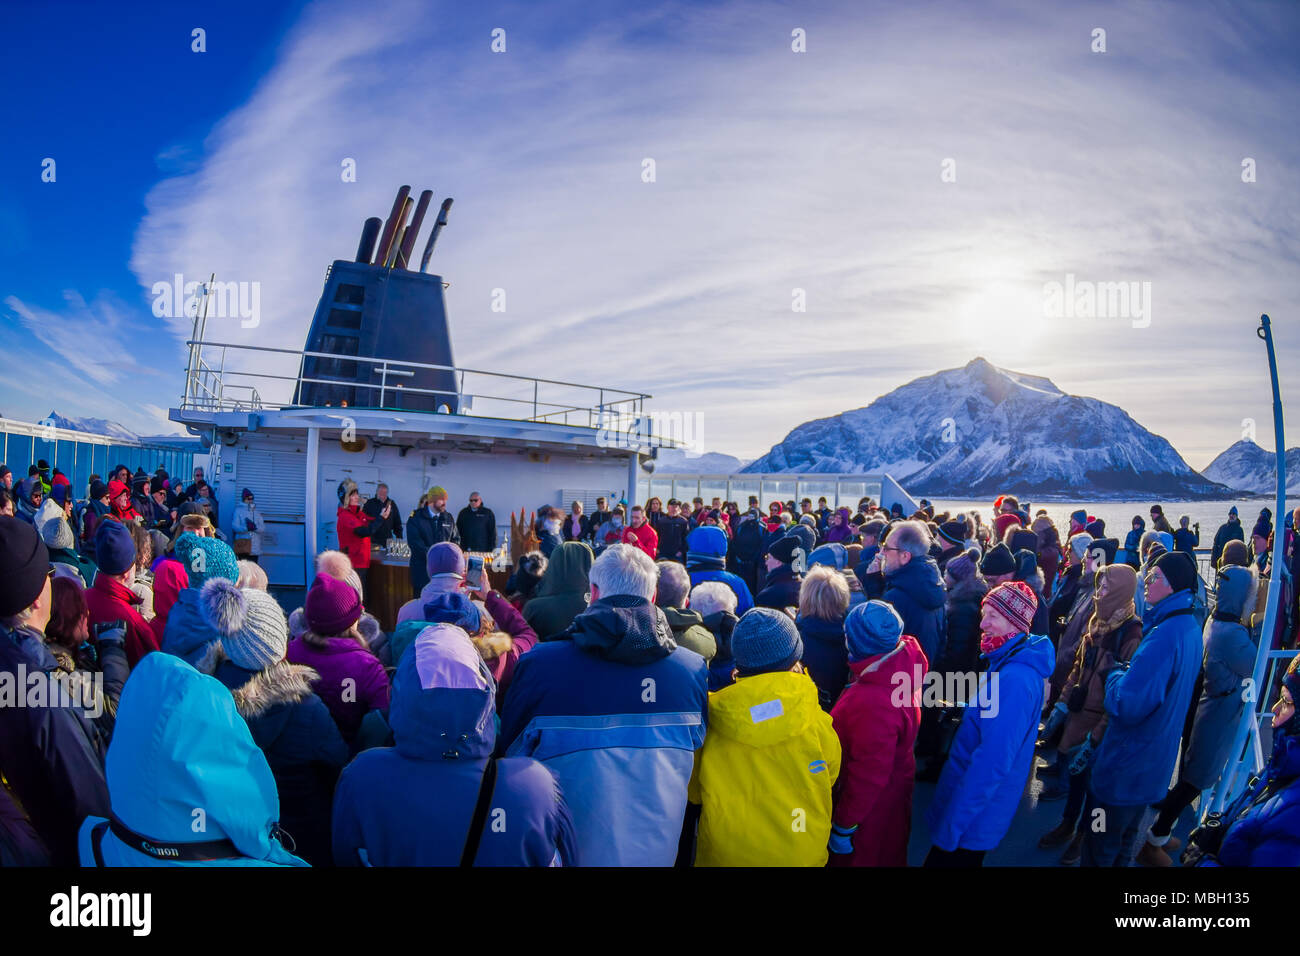 ALESUND, NORWAY - APRIL 04, 2018: Outdoor view of crowd of people in a KONG HARALD cruise enjoying and spending good time with other passengers, in Norway's coast between Bergen and Kirkenes Stock Photo